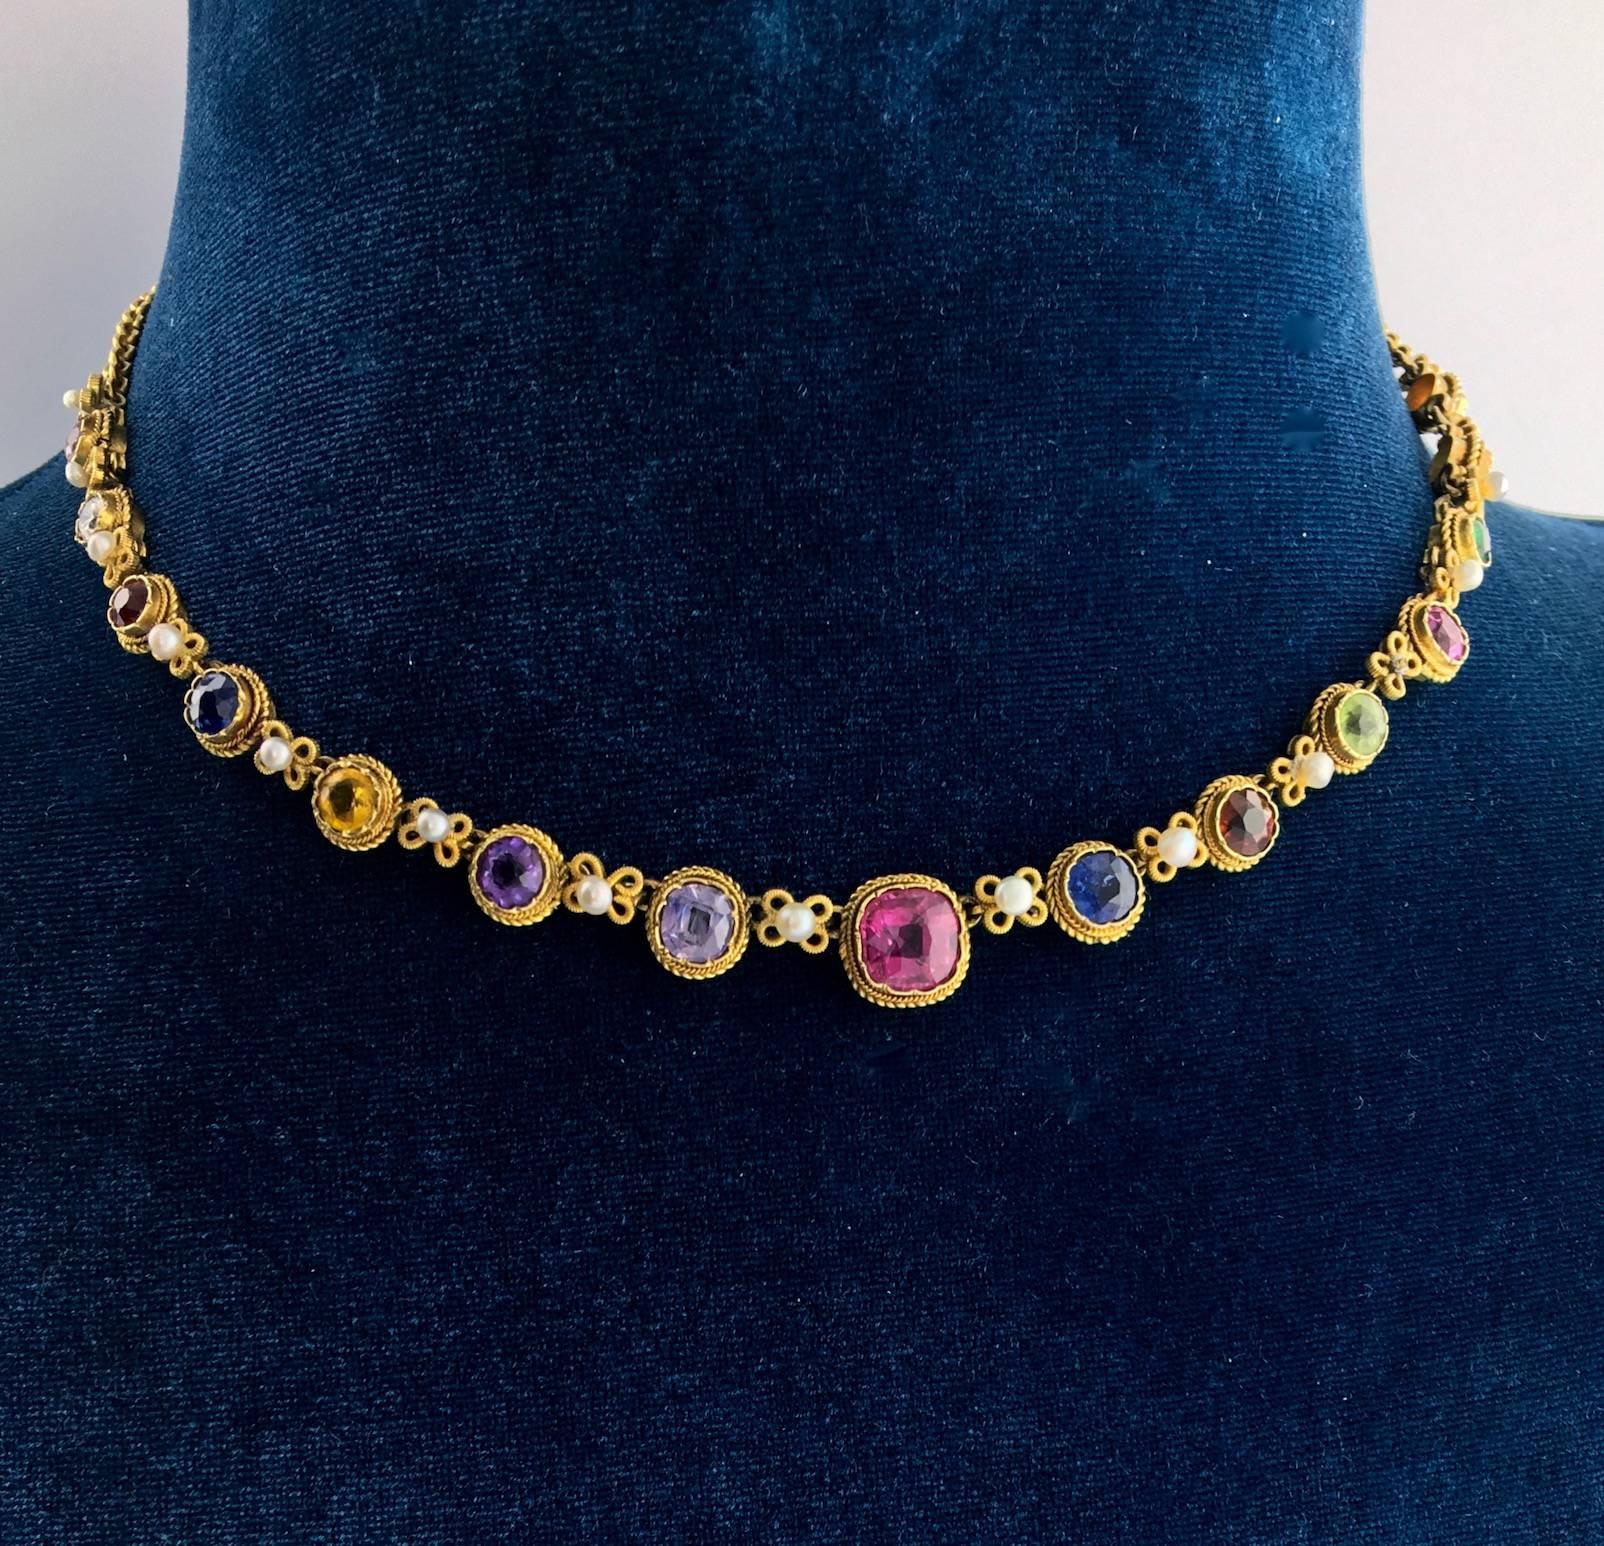 Beau-Ti-Ful! This Multi-Gem, Natural Pearl Necklace in yellow gold is very rare. 
All precious and Semi-Precious stones: Diamond, Emerald, Sapphire, Amethyst, Tourmaline, Citrine, Garnet, Spinel, Peridot.
Late XIXth-Early XXth Century.

Gross